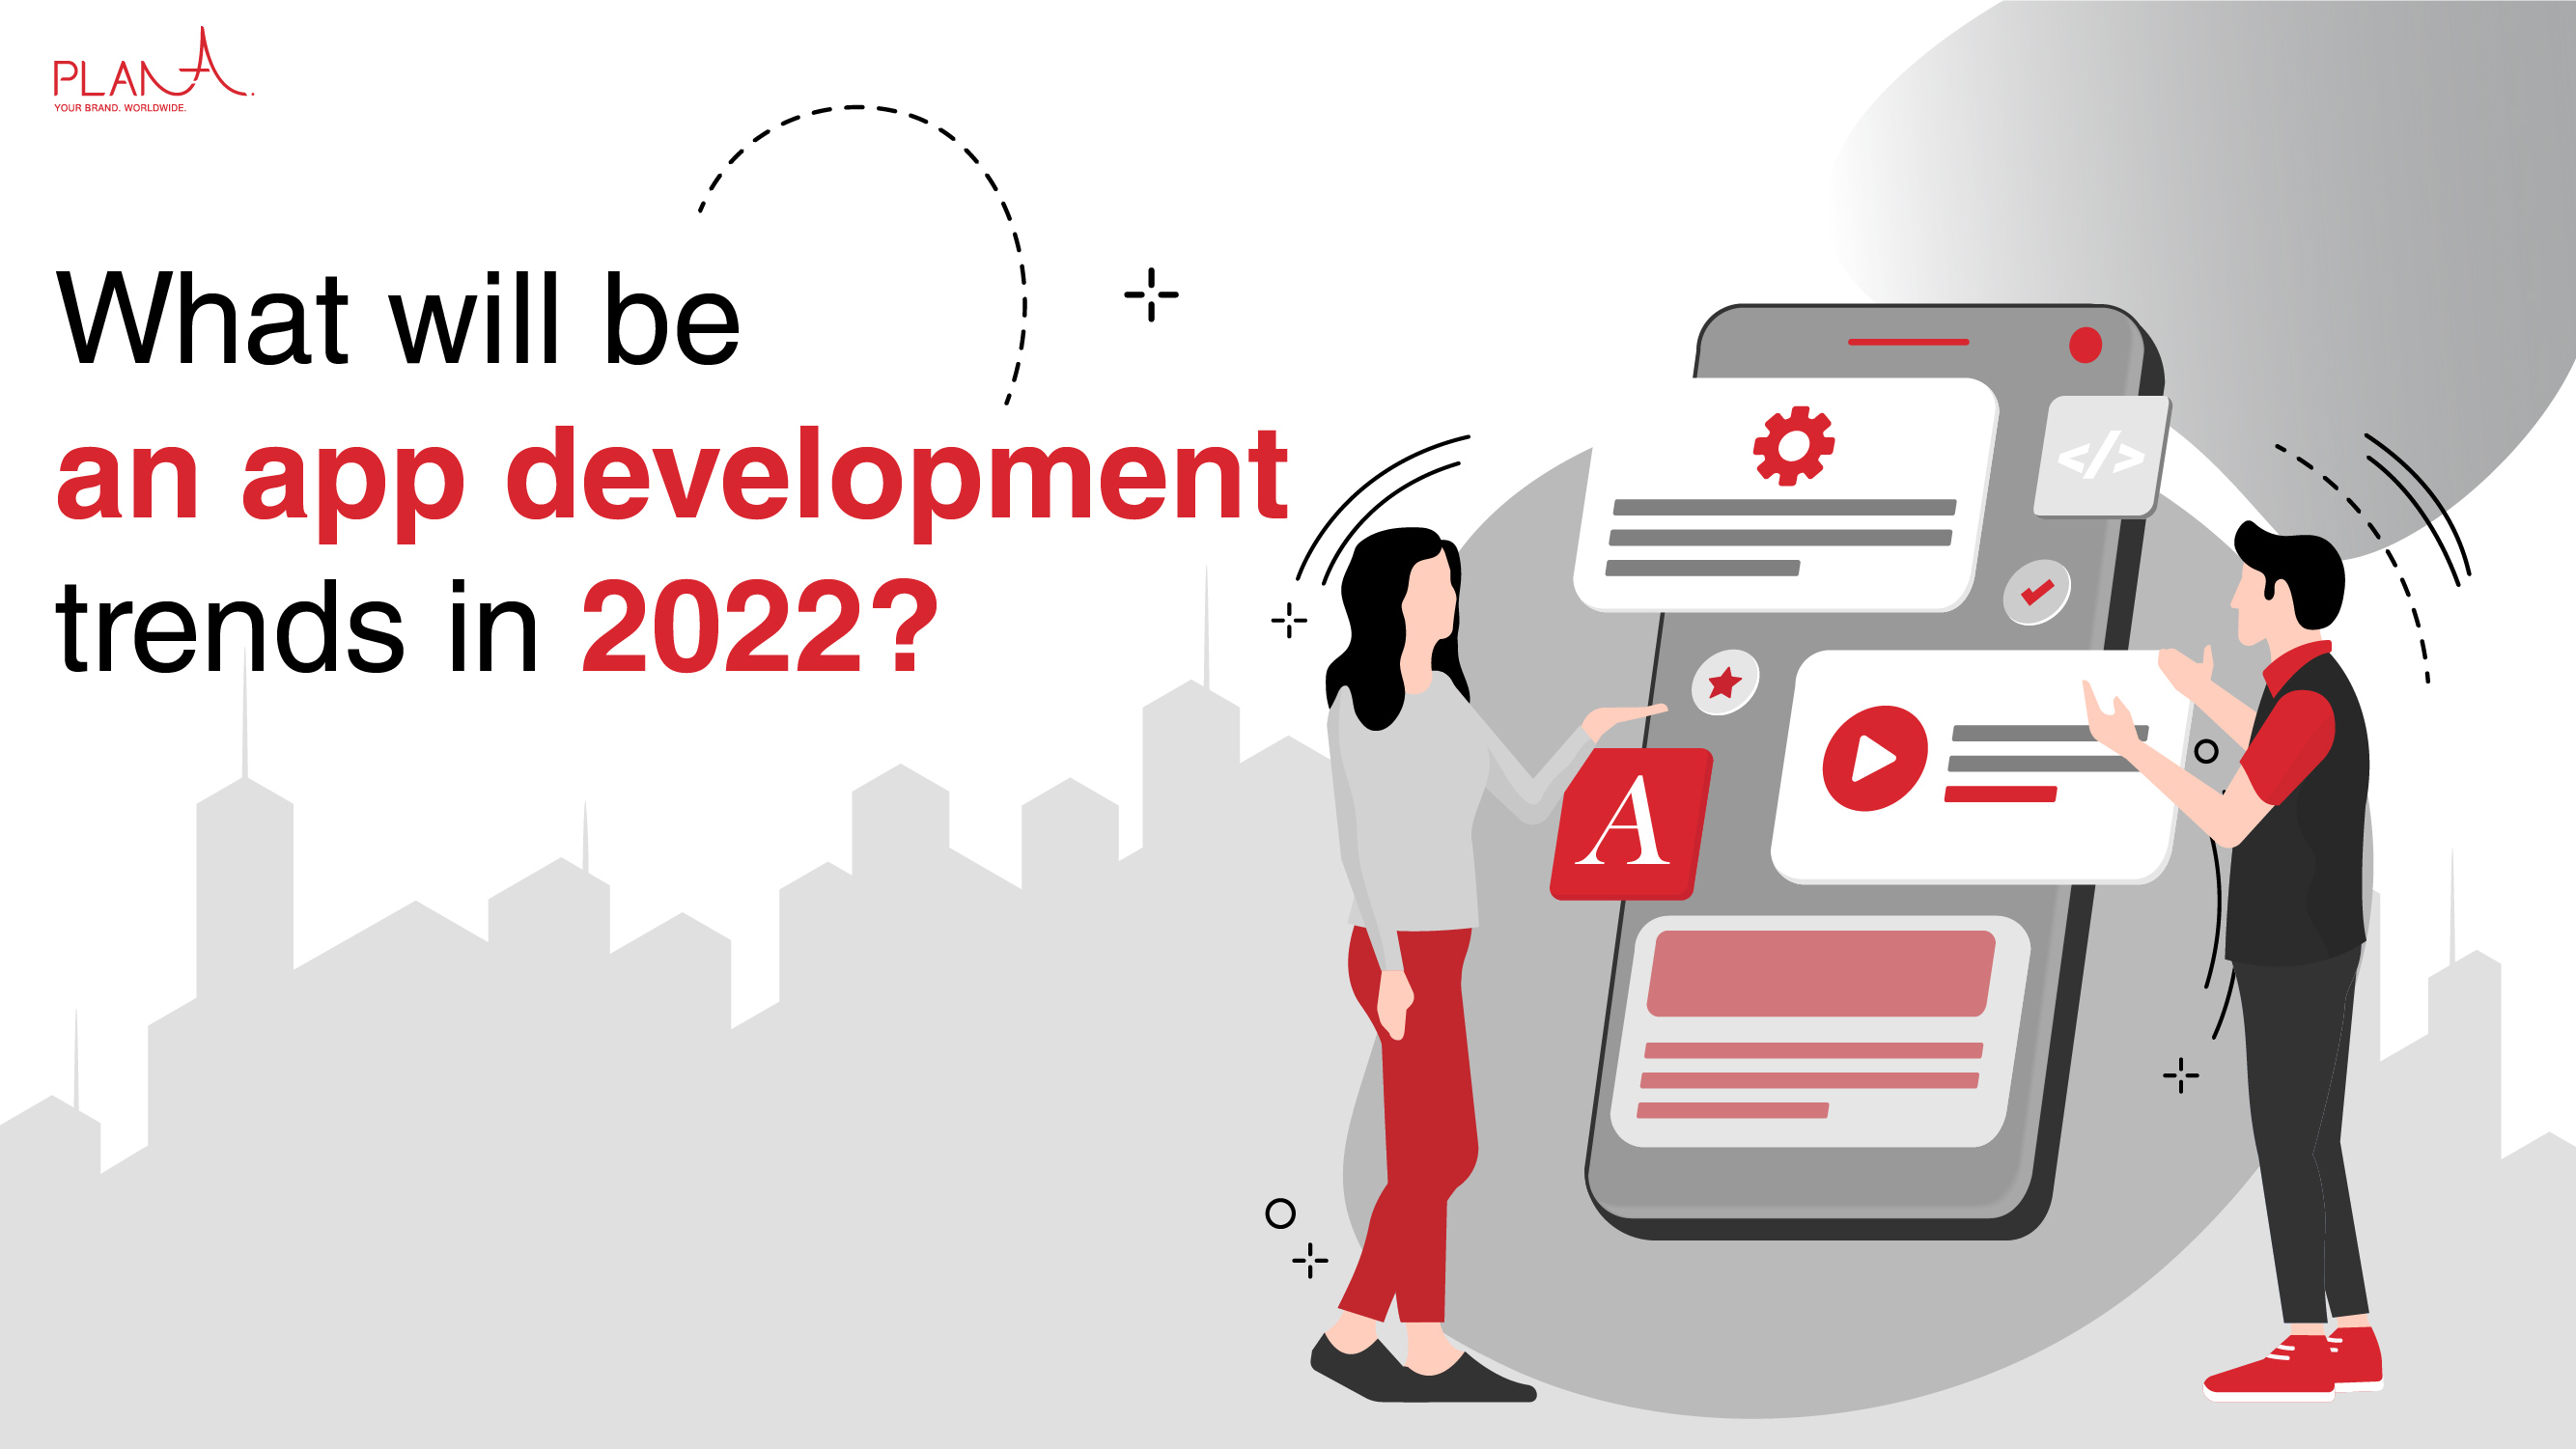 What will be an app development trends in 2022?